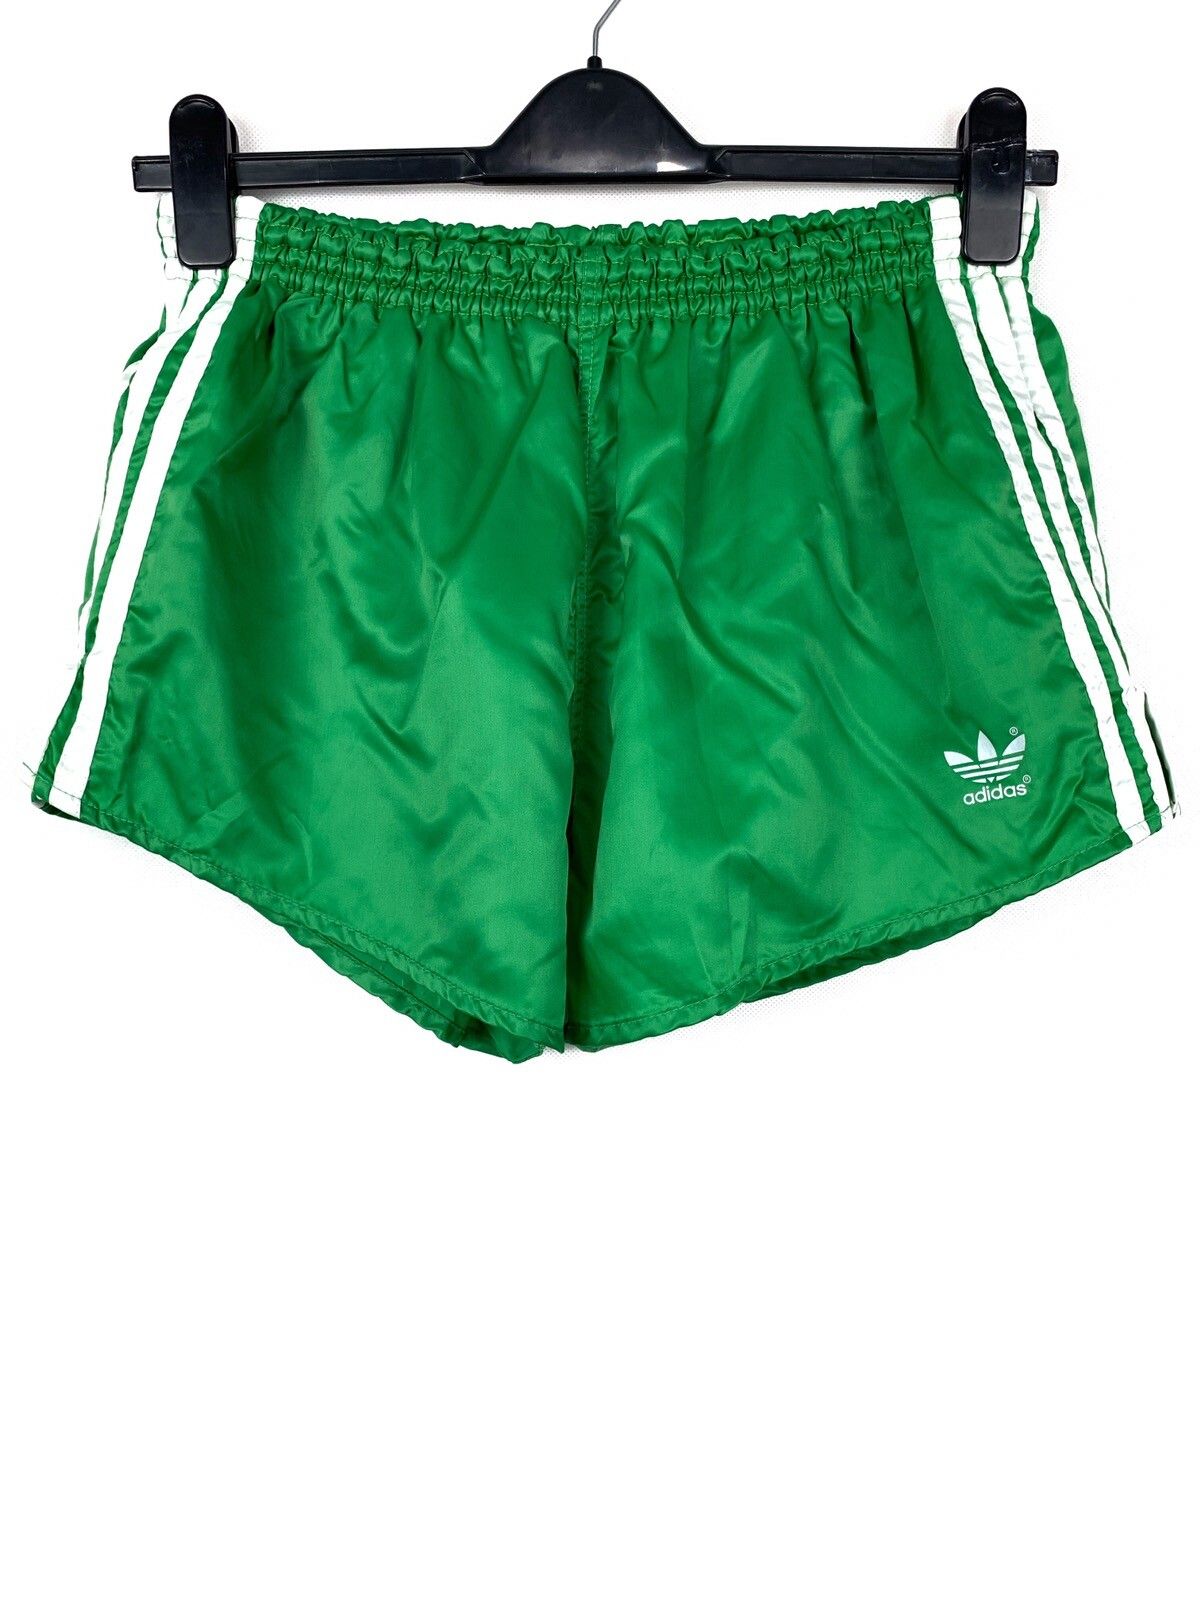 Adidas Vintage Adidas Track 90s West Germany Shorts Size US 34 / EU 50 - 1 Preview